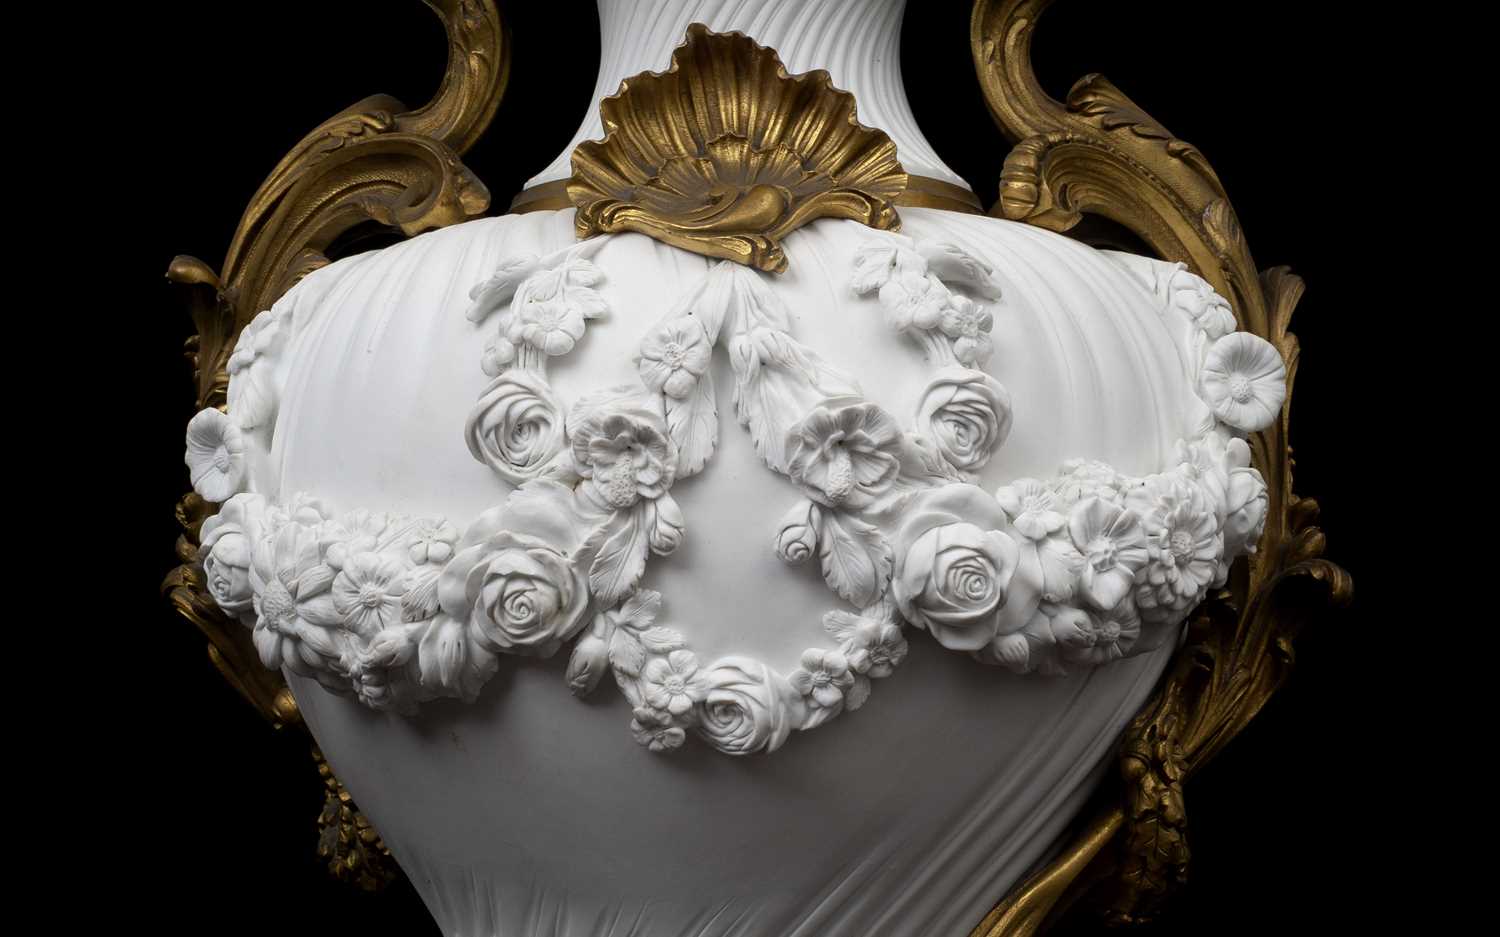 A VERY LARGE PAIR OF 19TH CENTURY LOUIS XV STYLE PORCELAIN AND ORMOLU VASES AND COVERS - Image 5 of 5